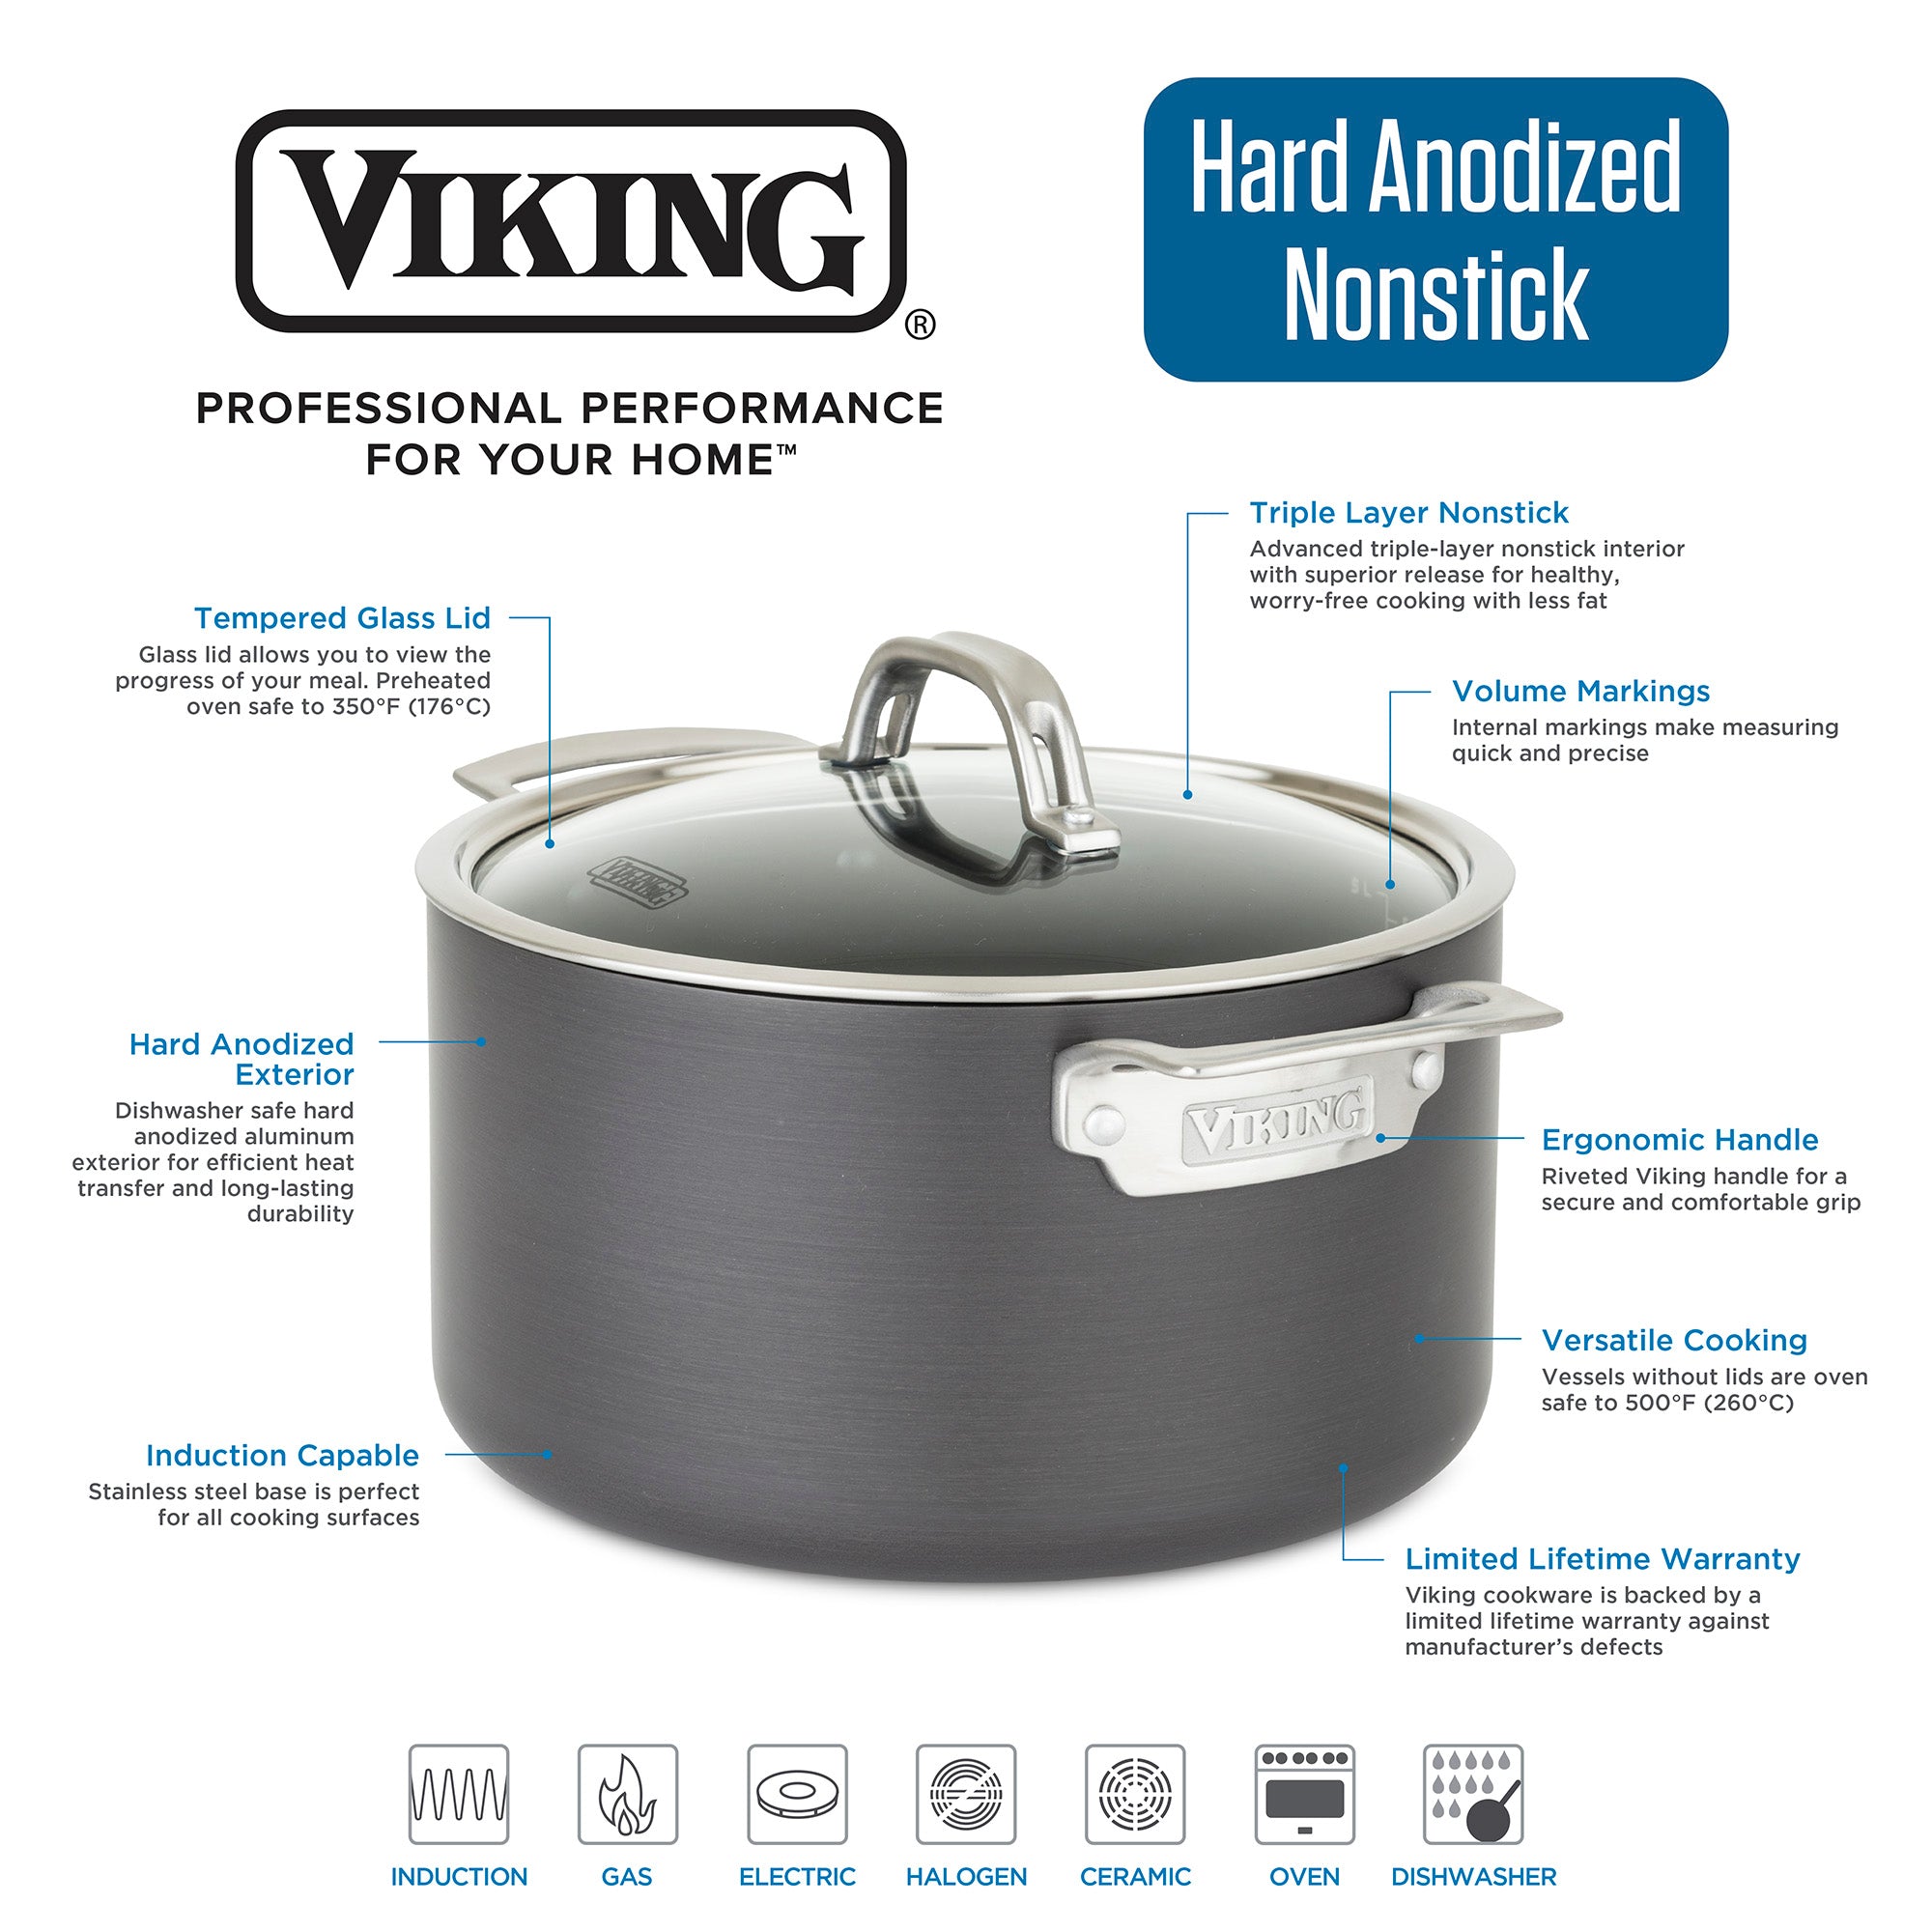 Viking Hard Anodized Nonstick 3-Quart Sauce Pan with Glass Lid